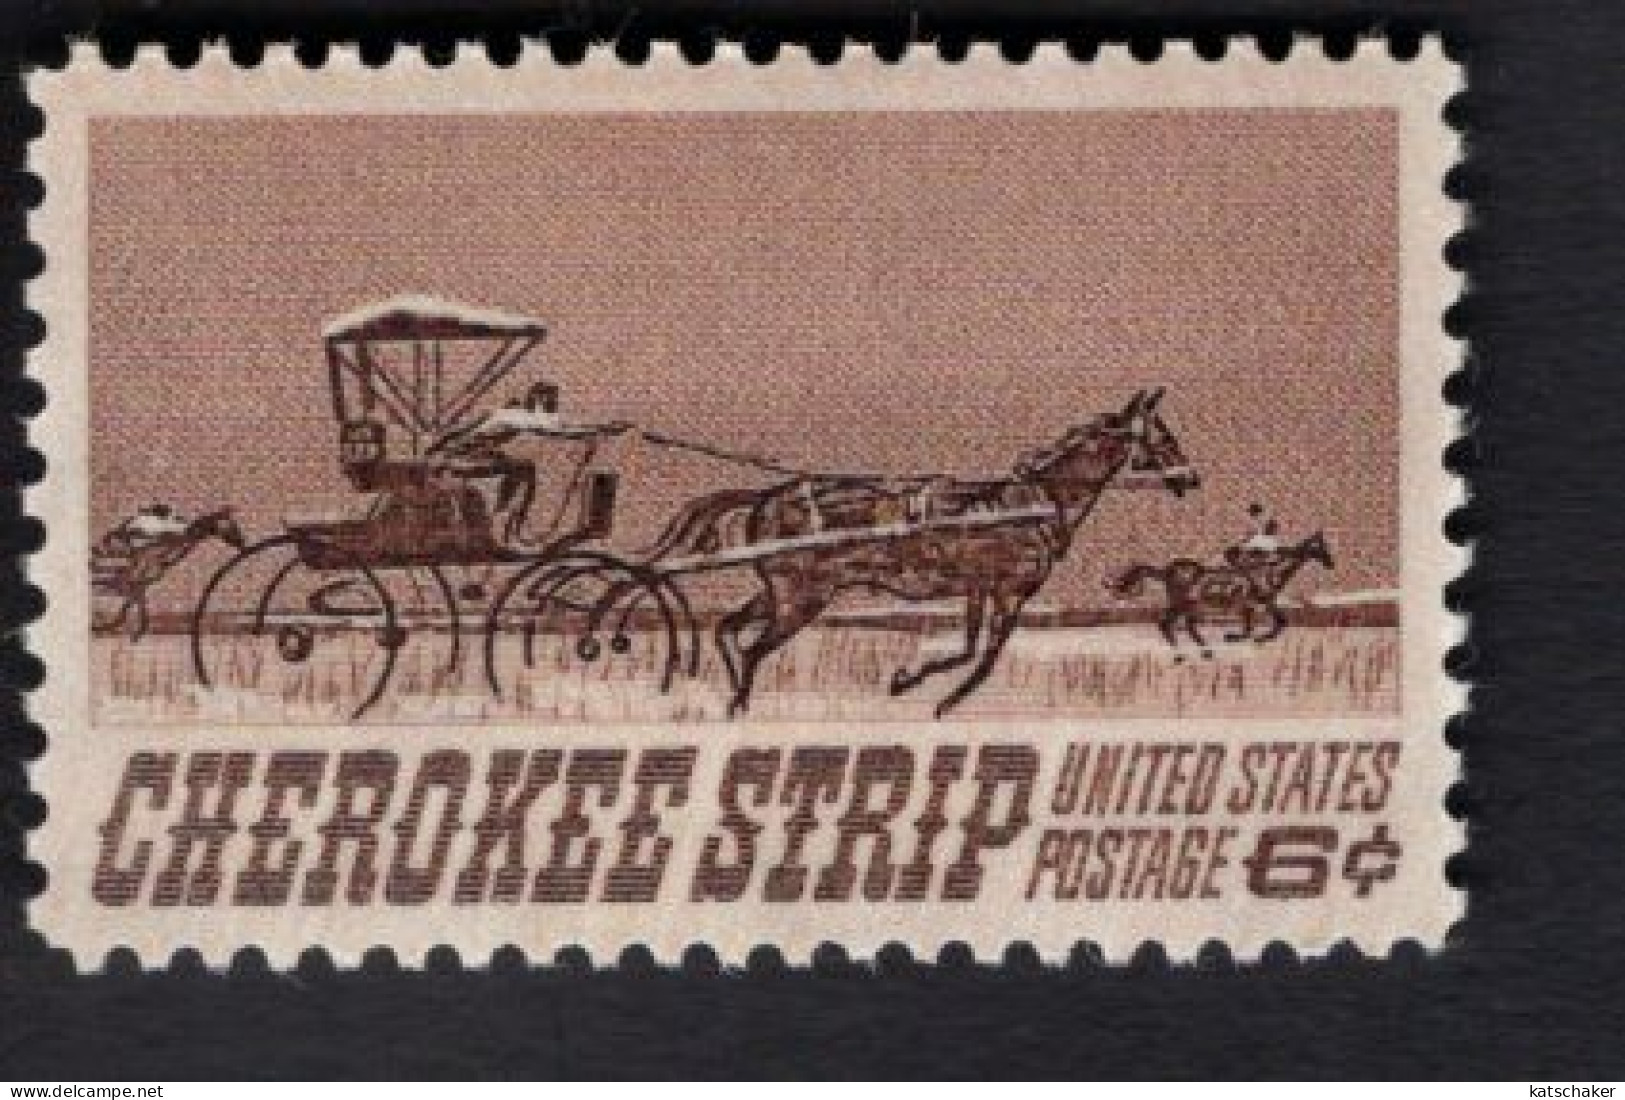 203630620 1968 SCOTT 1360 (XX) POSTFRIS MINT NEVER HINGED - CHEROKEE STRIP - Coach And Horse - Unused Stamps